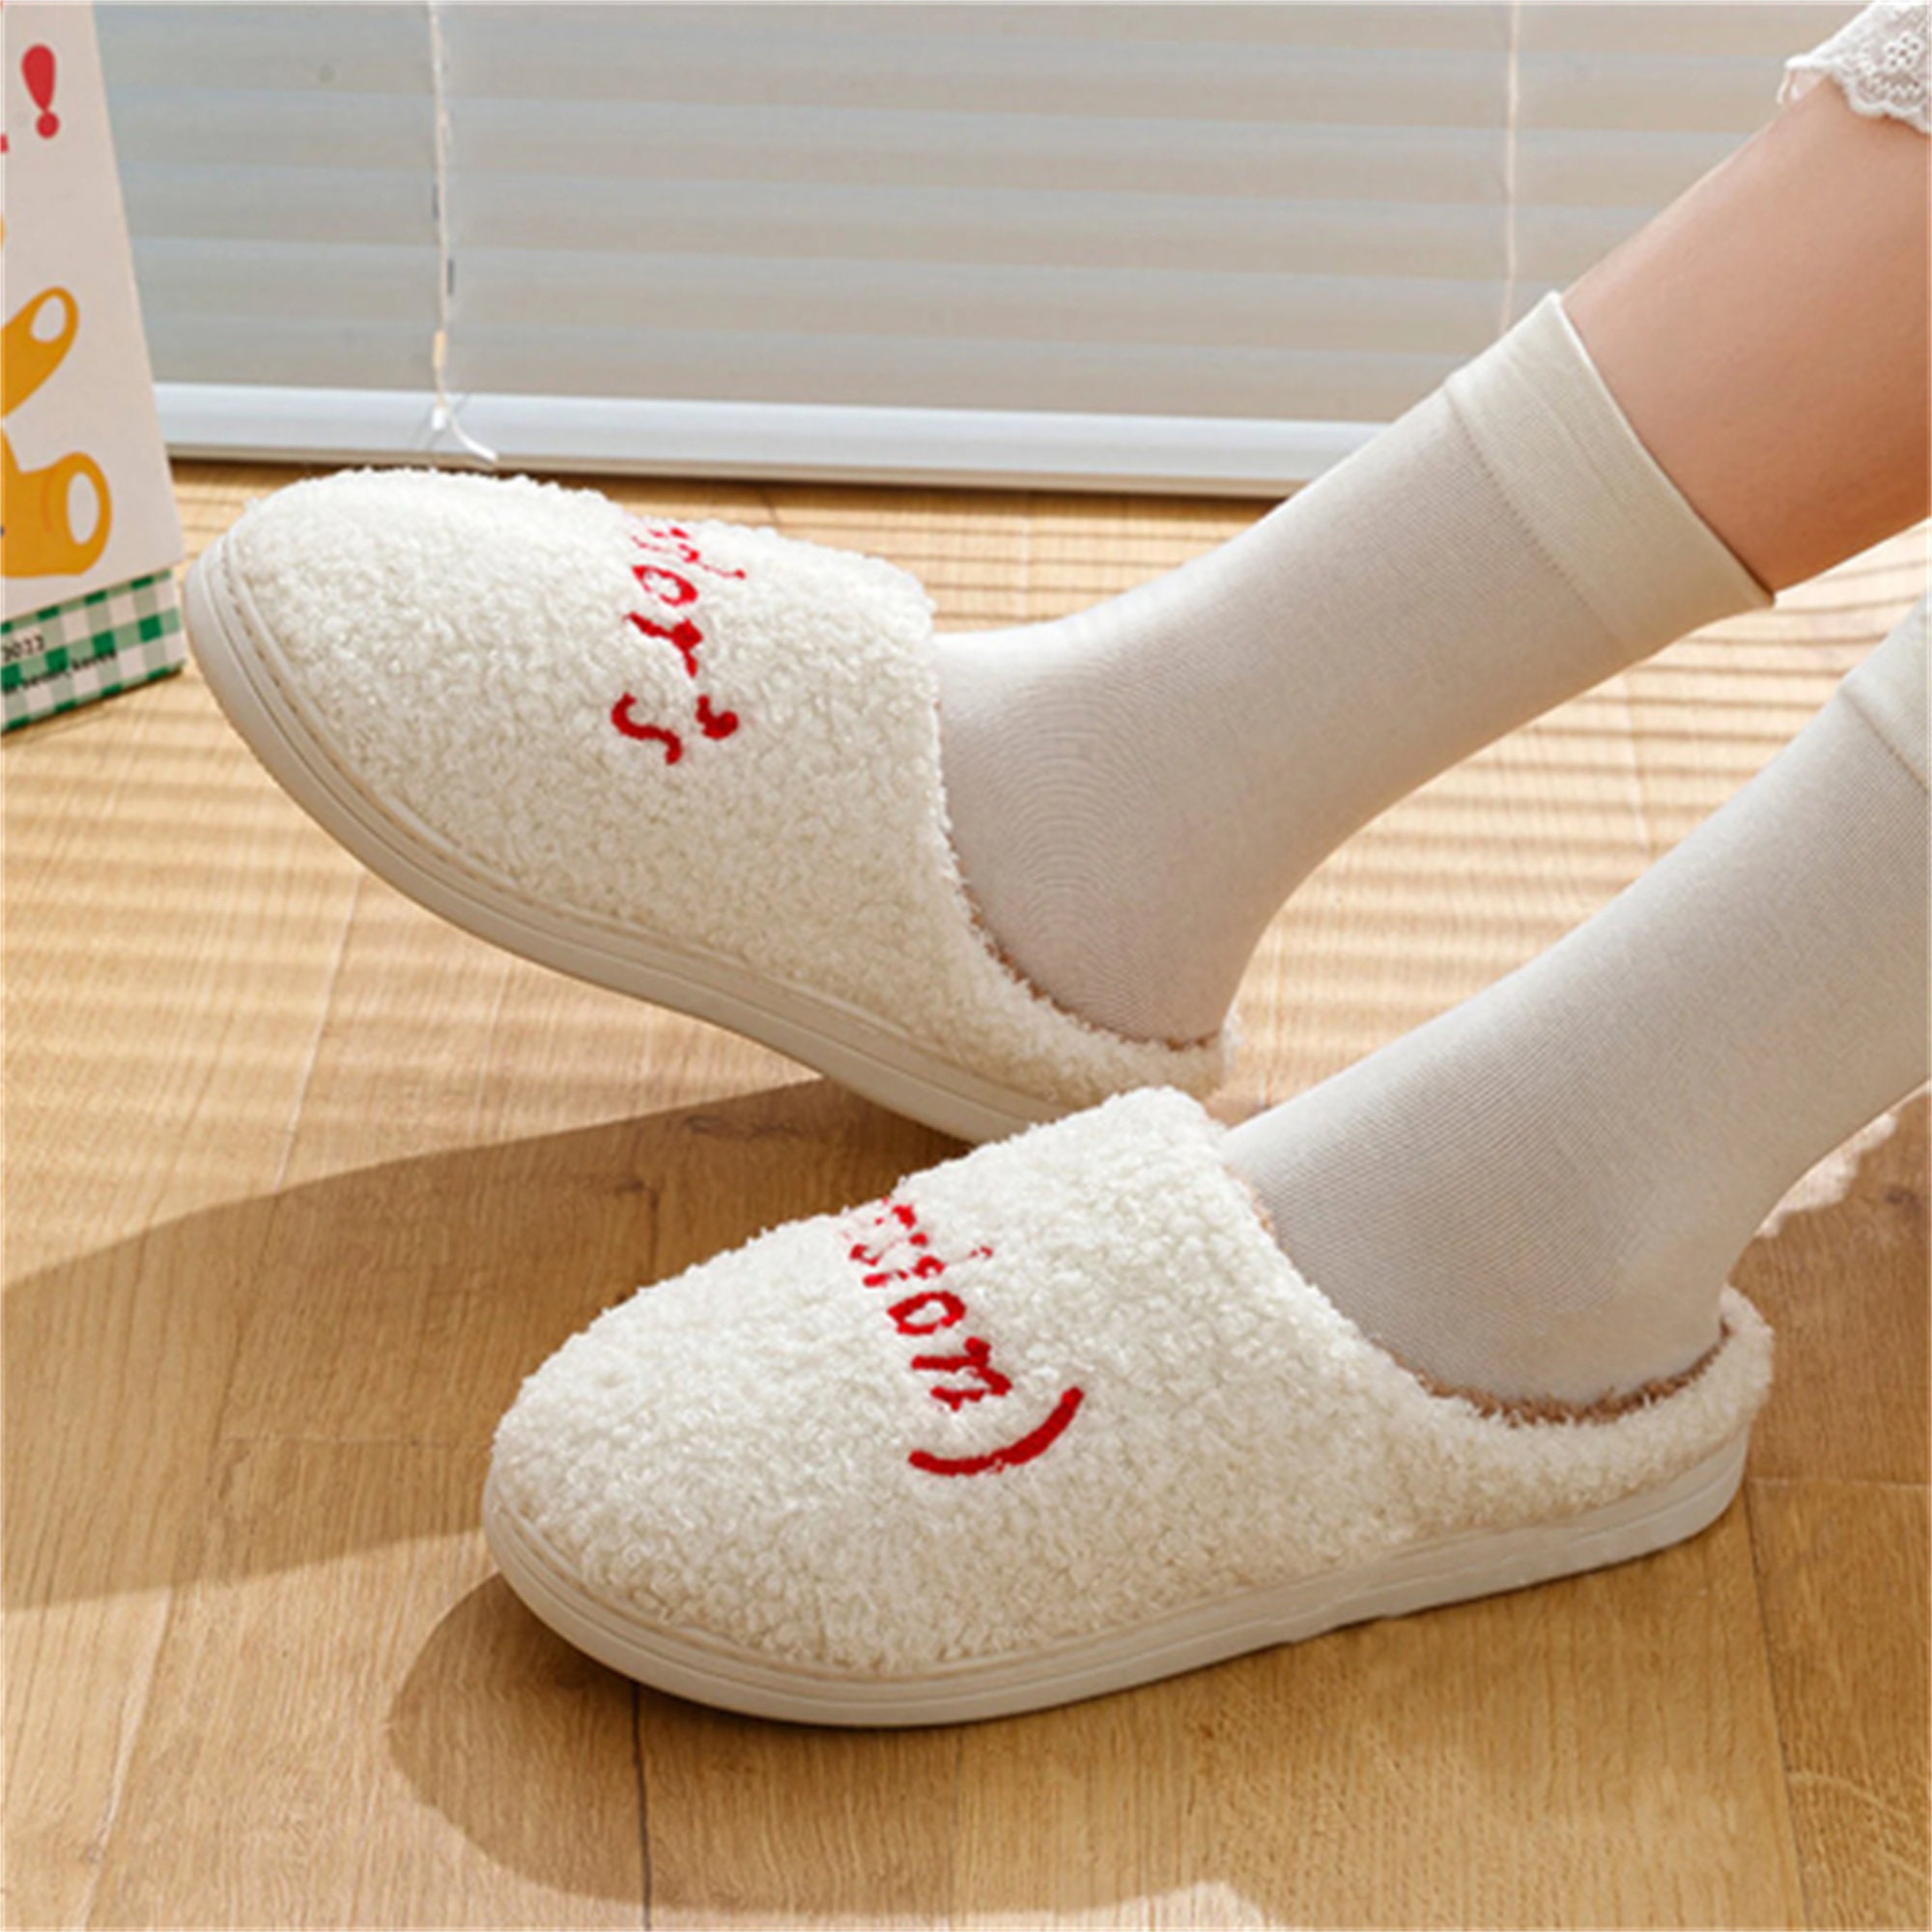 Discover Eras Version Slippers, Midnight Slippers Cozy, Taylor Slippers